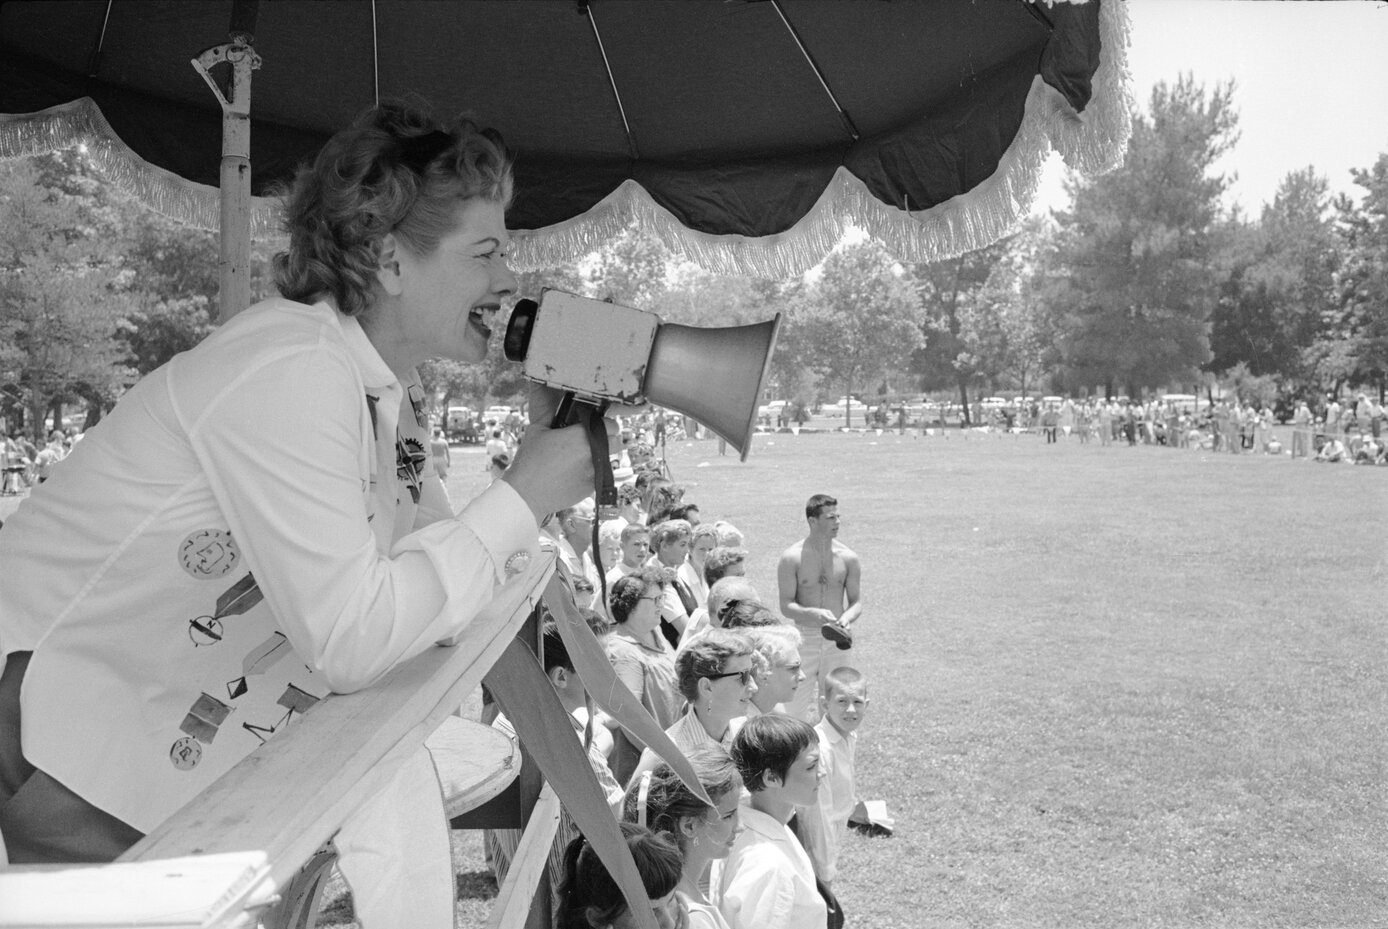 Lucy Arnaz yelling at a crowd with a megaphone during an employee picnic